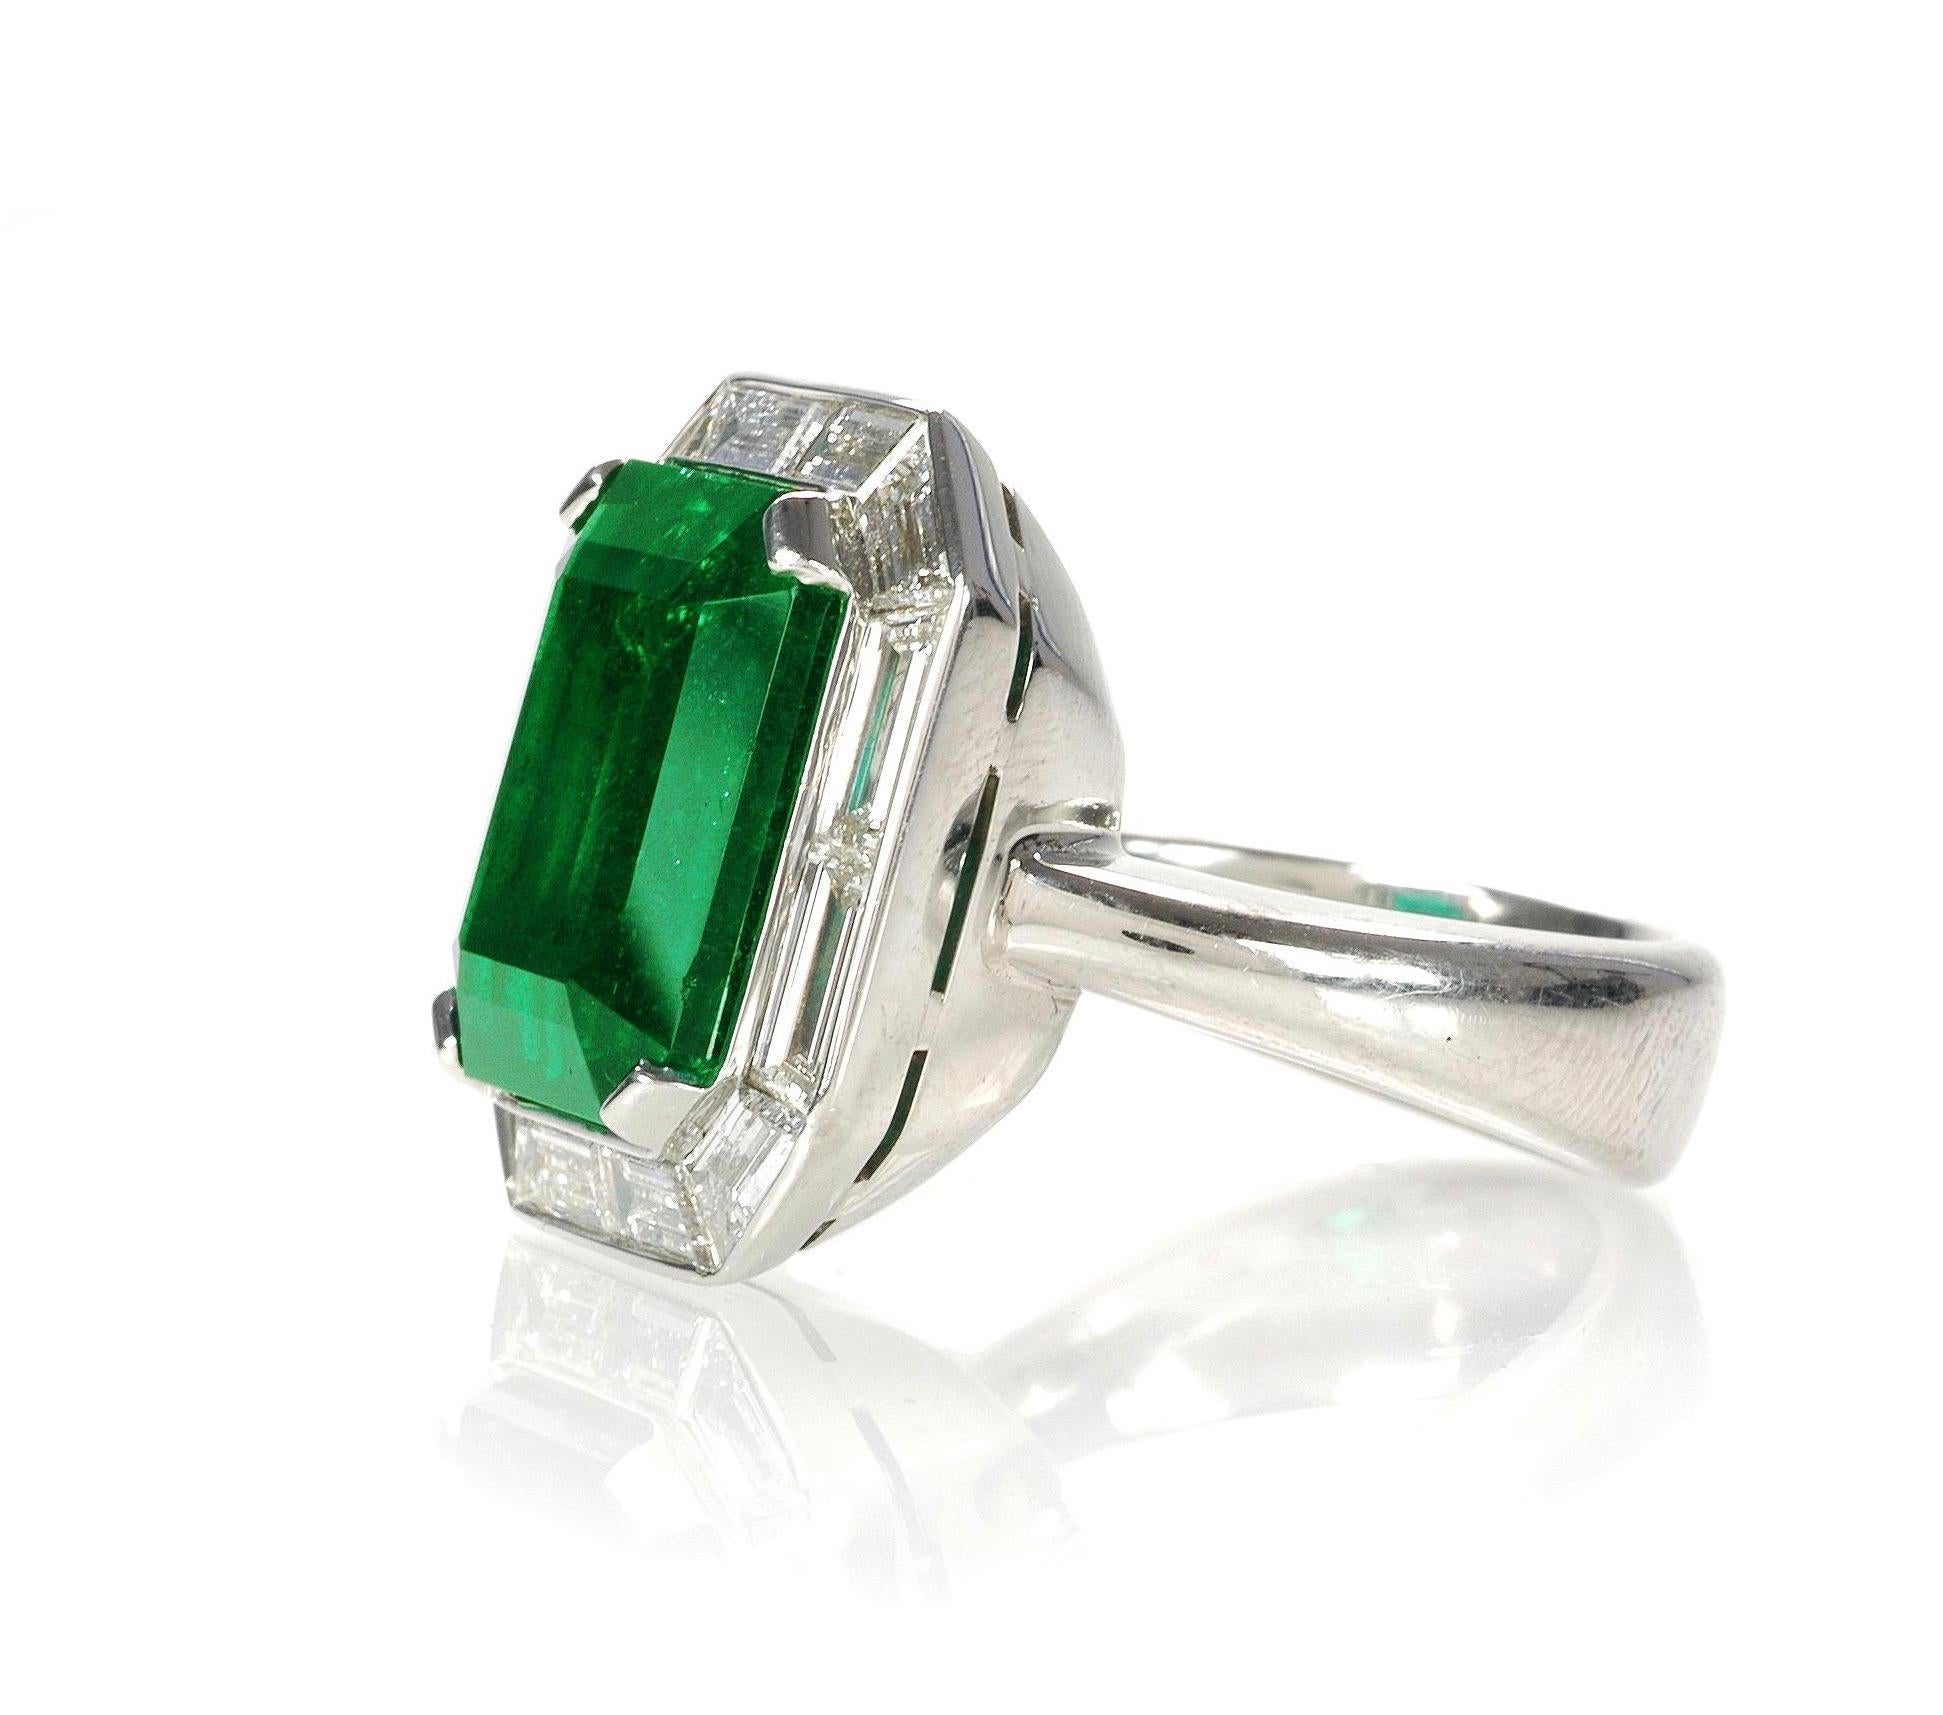 The rich green 13.48cts emerald cut emerald is set in an exquisite, and completely custom made, platinum and diamond mounting.  The baguette cut diamonds (12=2.50cts) were all individually cut to perfectly surround the center stone.  Made in one of